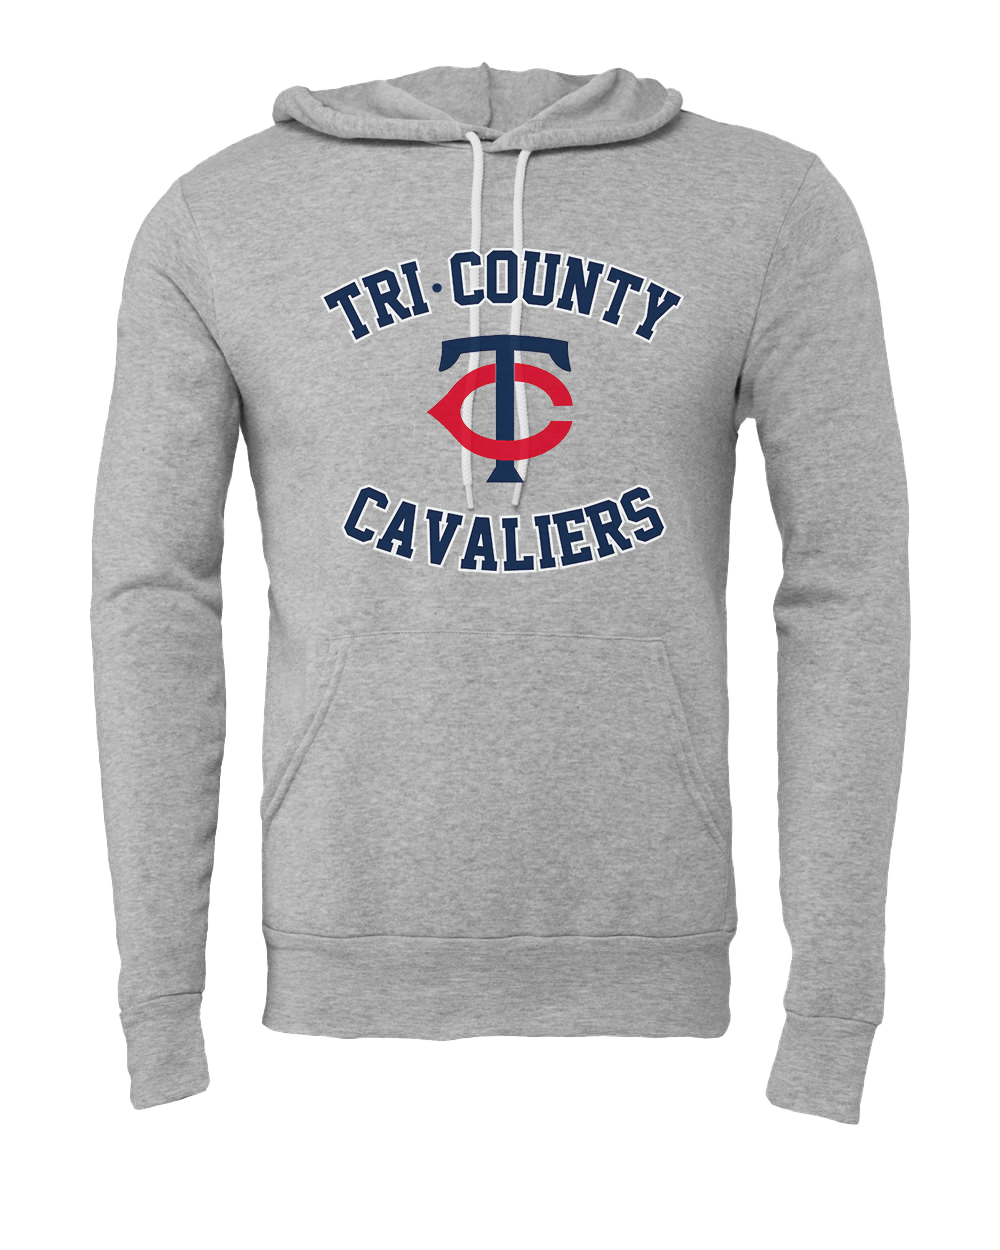 Tri-County Cavaliers Arched Hoodie - Athletic Heather